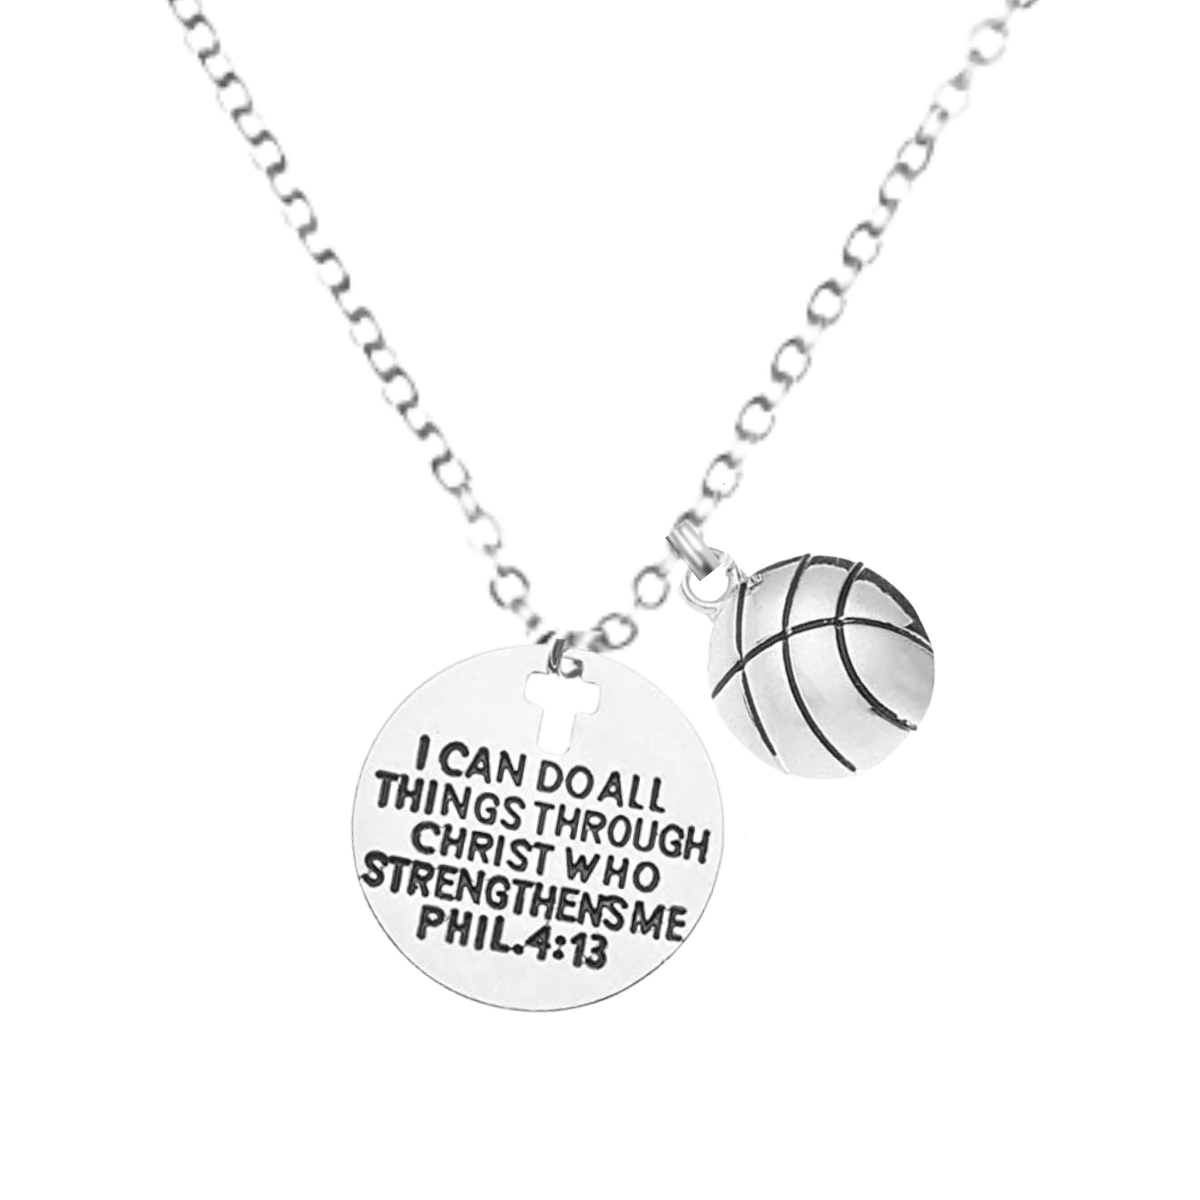 Stylish Basketball Necklaces for Sports Enthusiasts